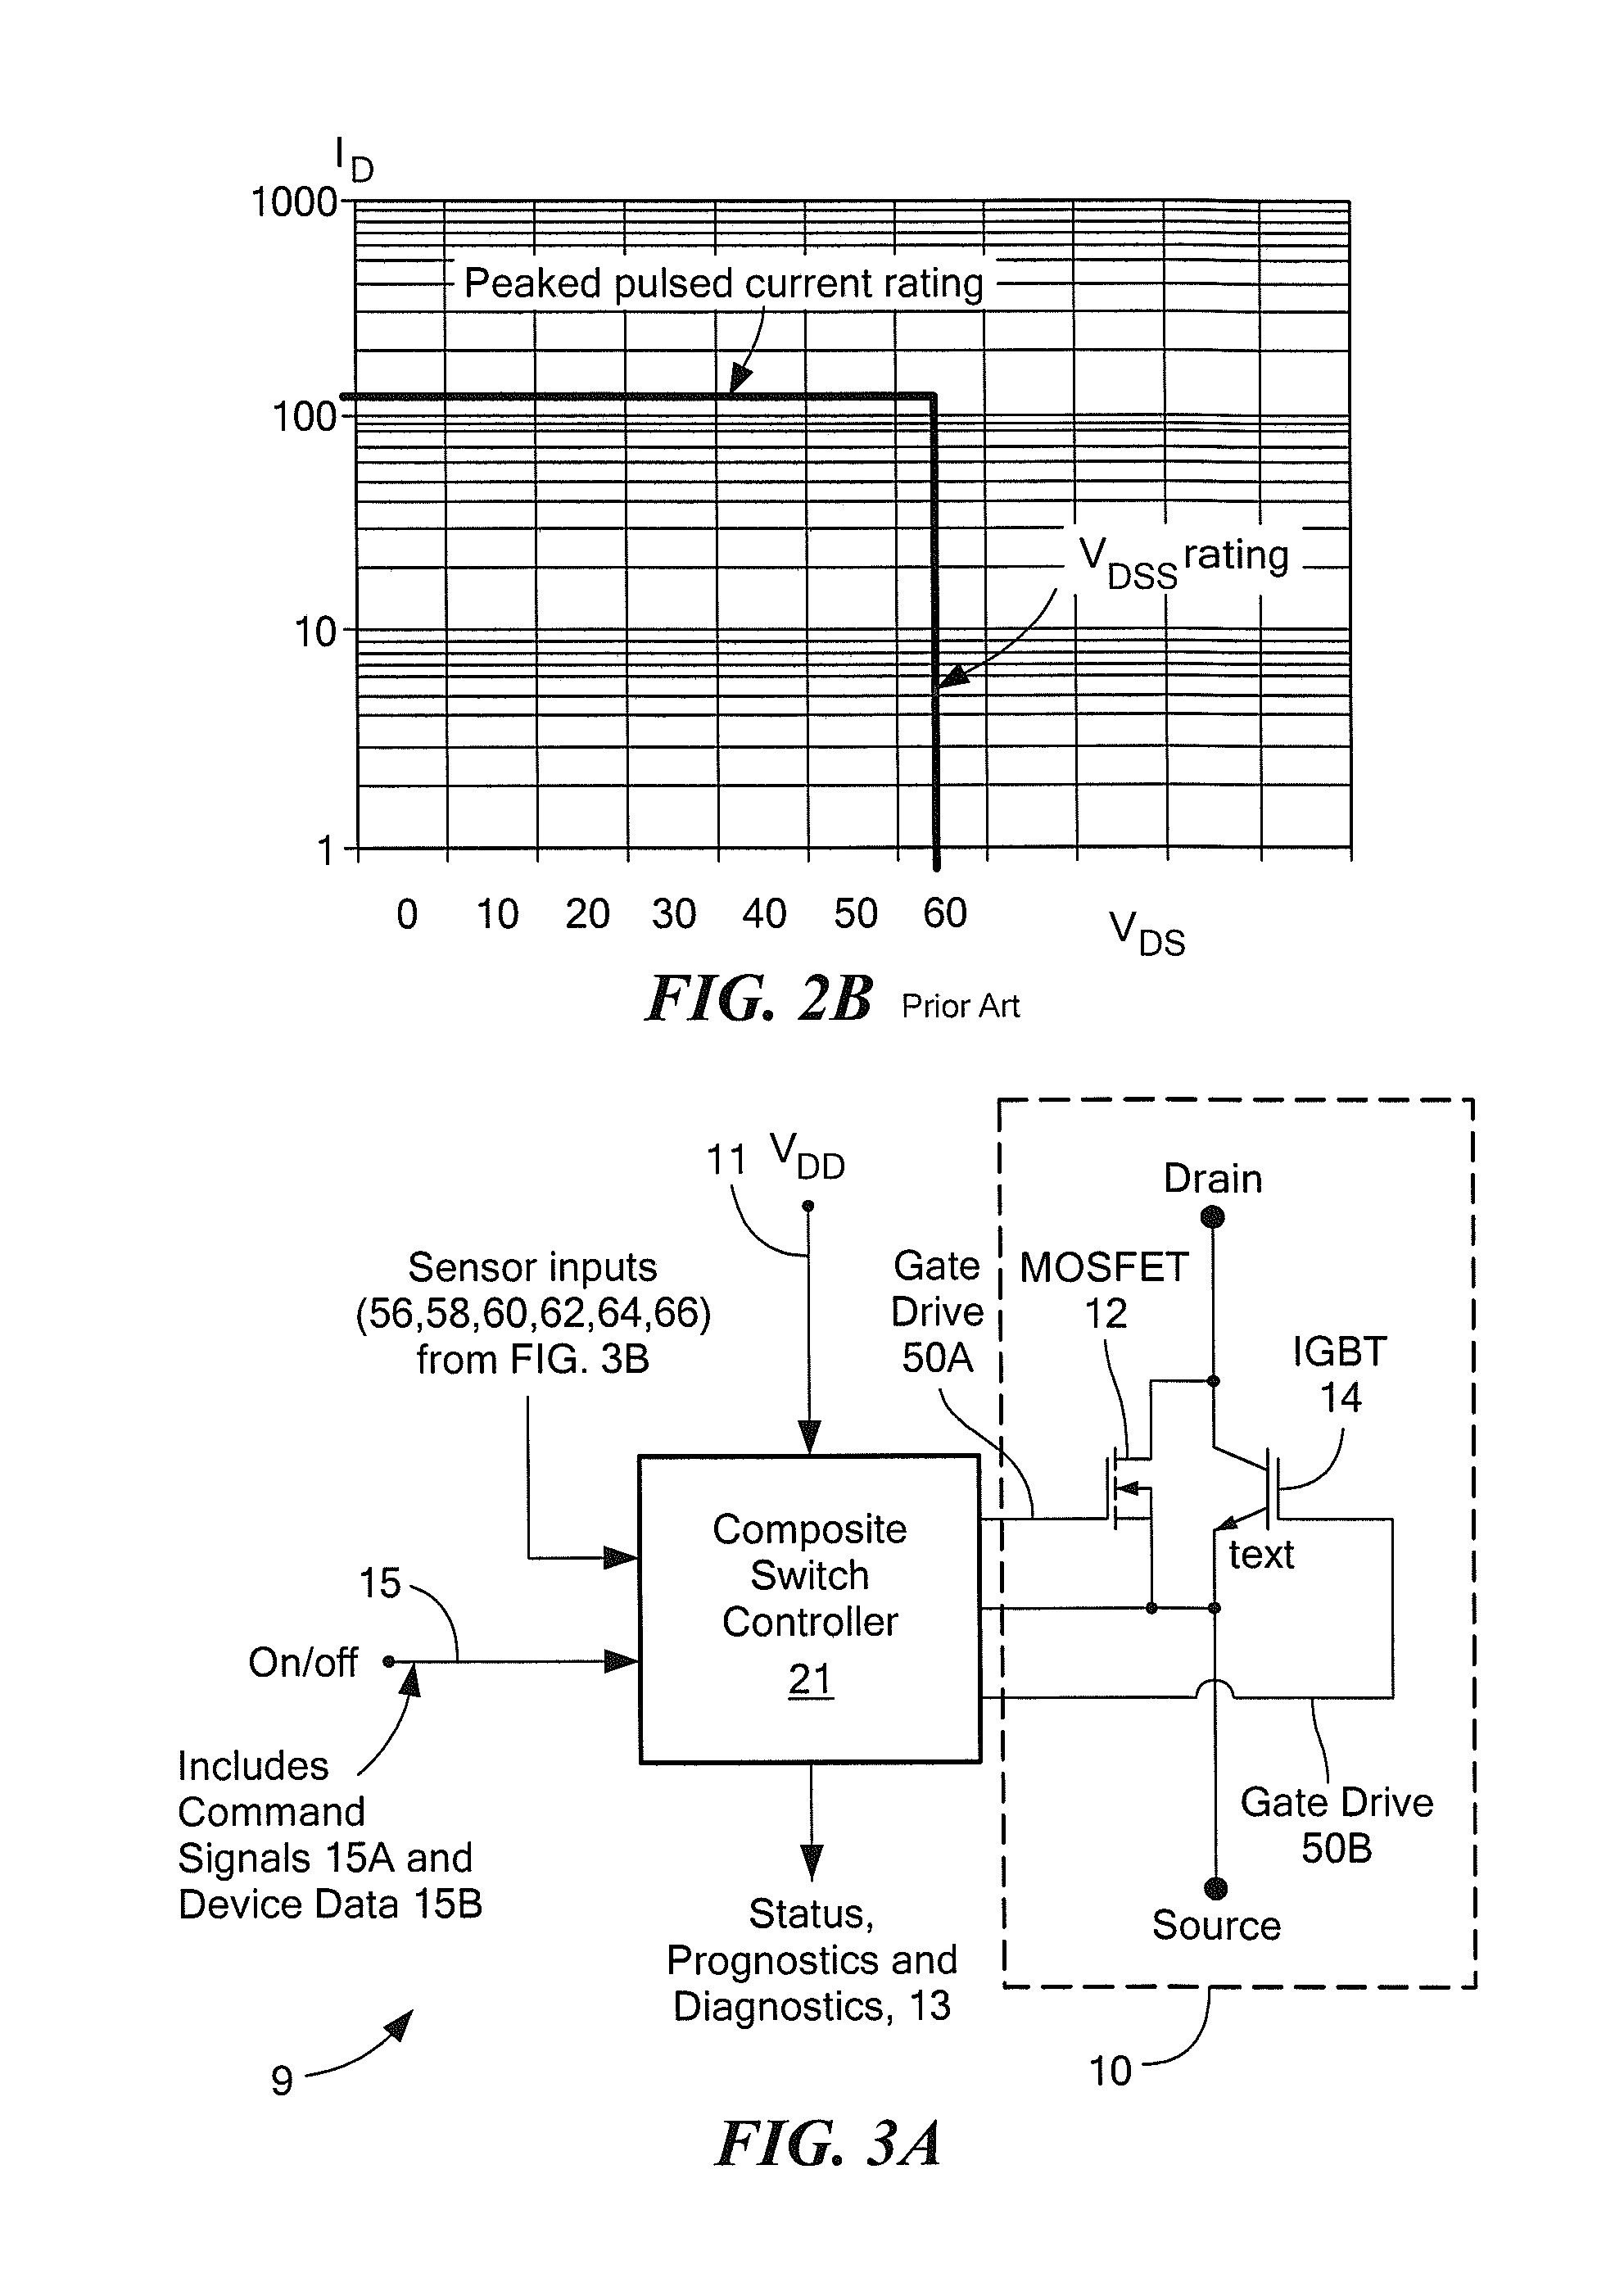 Adaptive gate drive control method and circuit for composite power switch